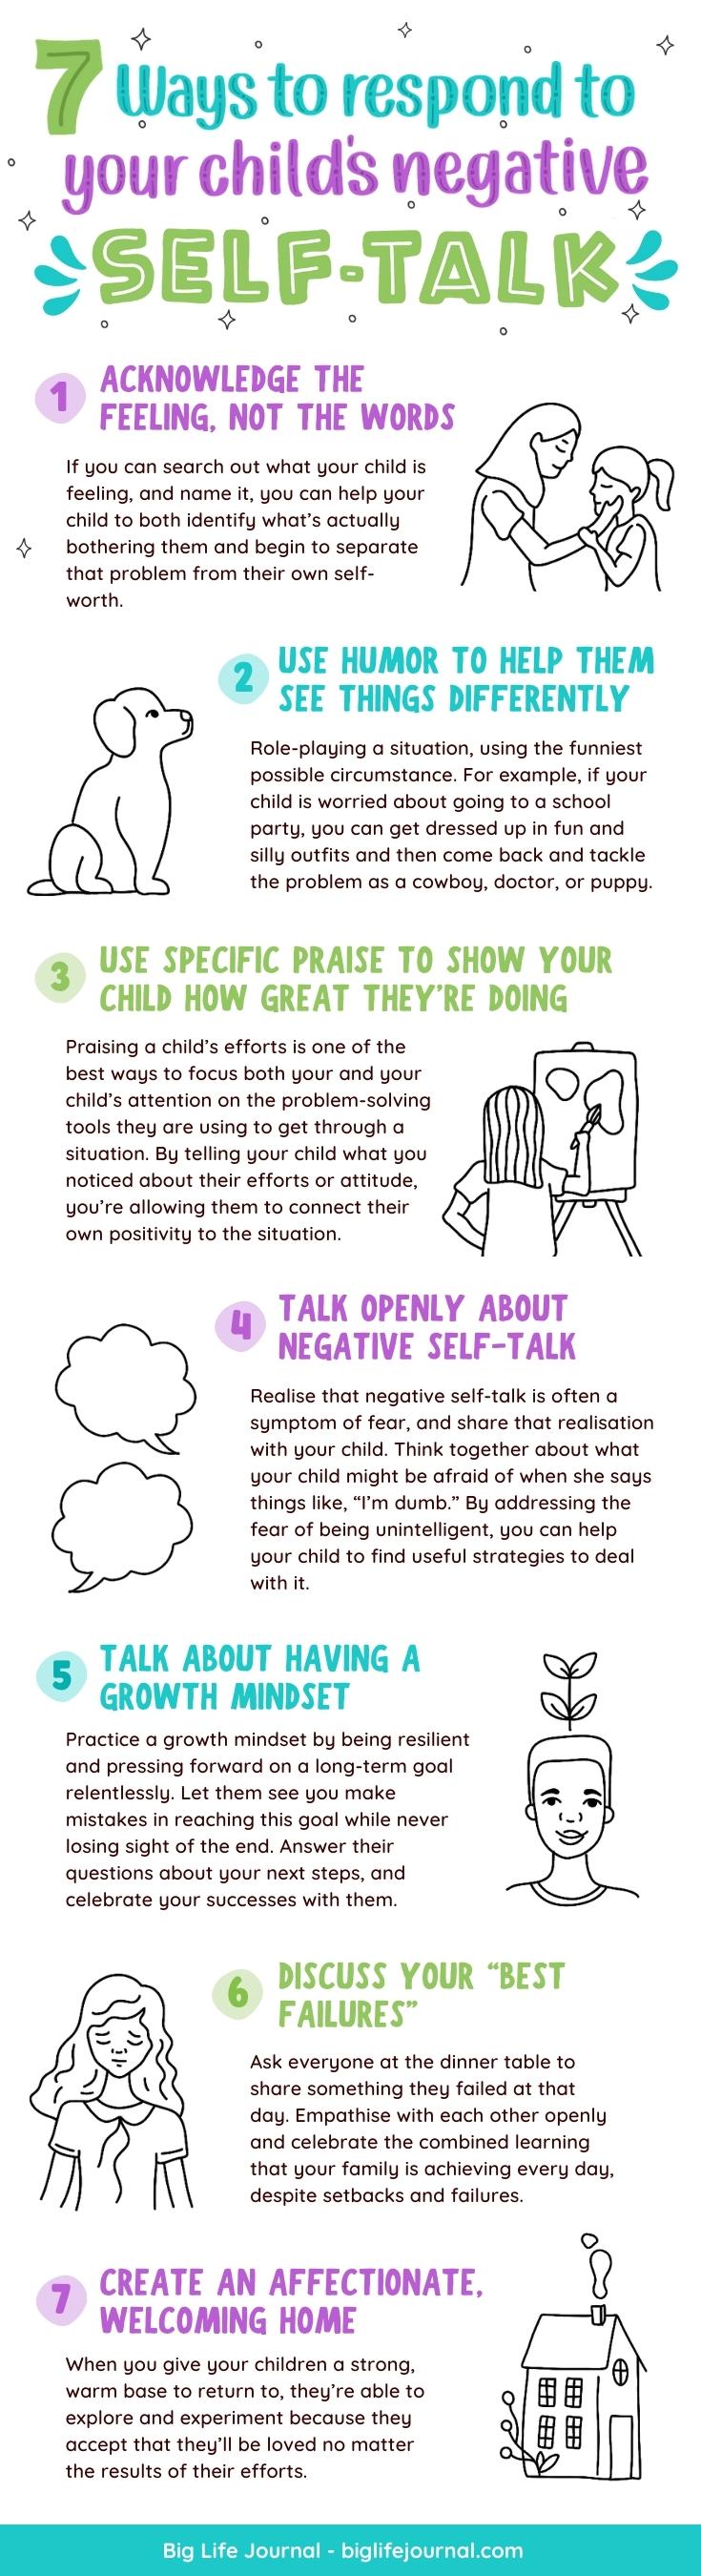 7 Ways to Respond to Your Child’s Negative Self-Talk